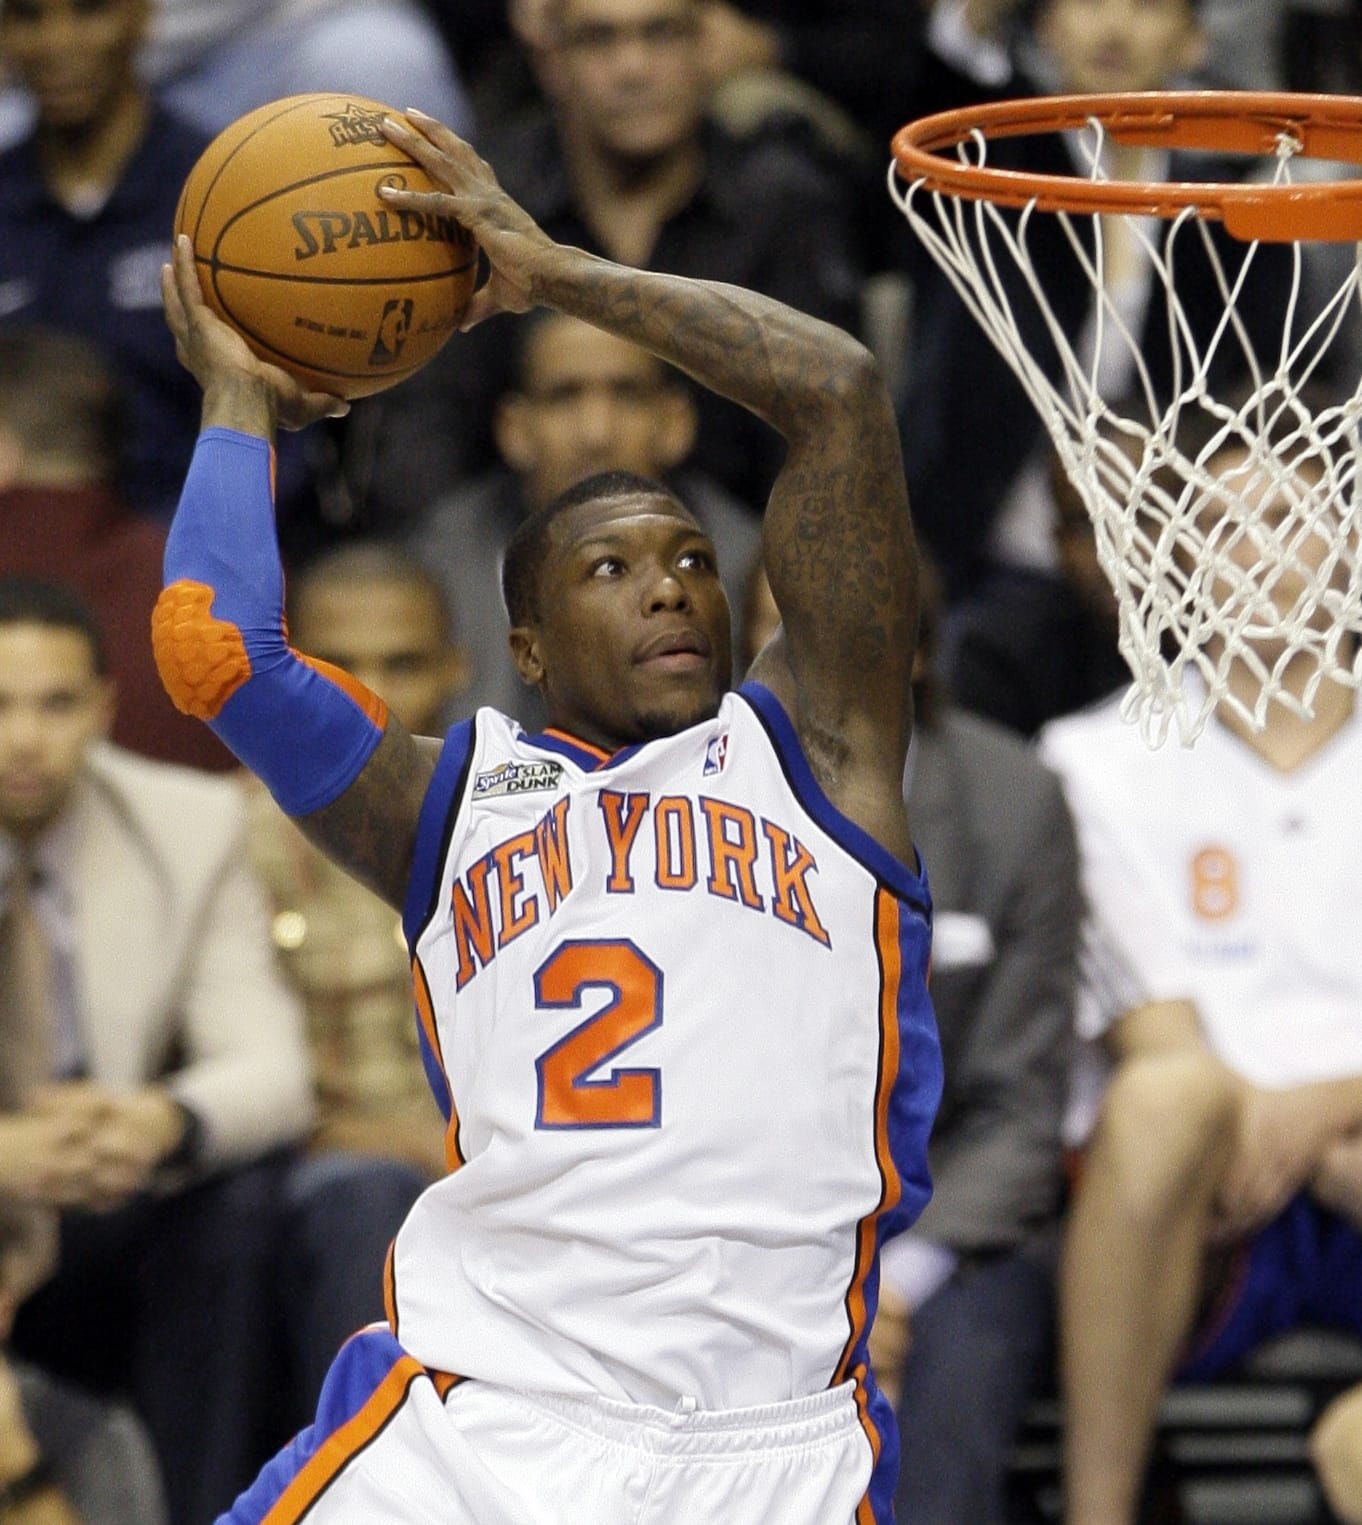 Seattle gives tryout to former NBA star Nate Robinson